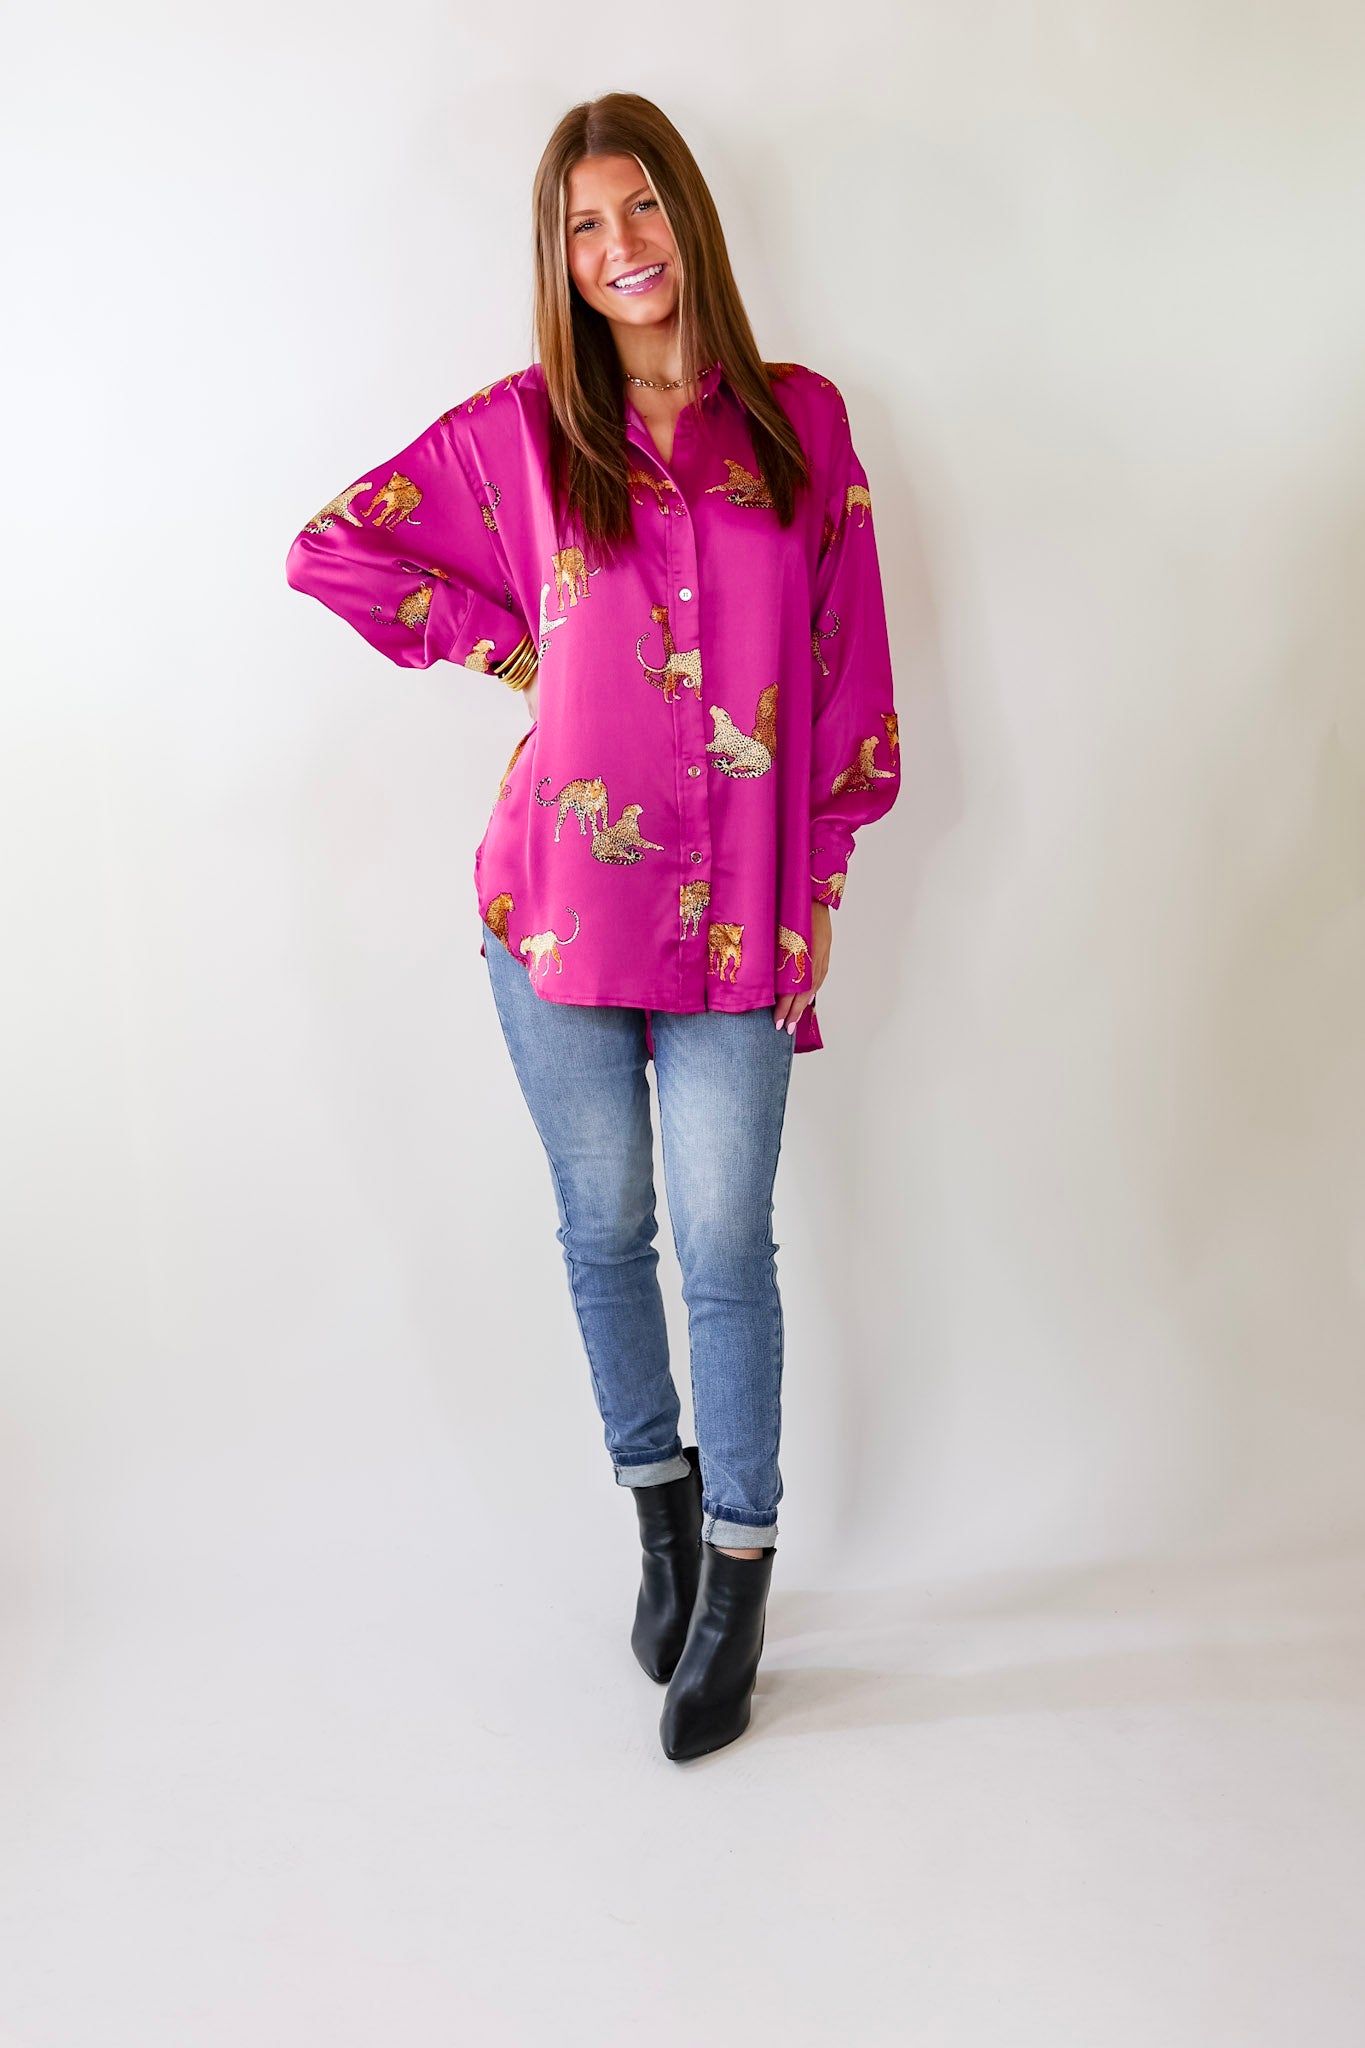 Tell Me Something Good Cheetah Print Long Sleeve Button Up Top in Magenta Pink - Giddy Up Glamour Boutique